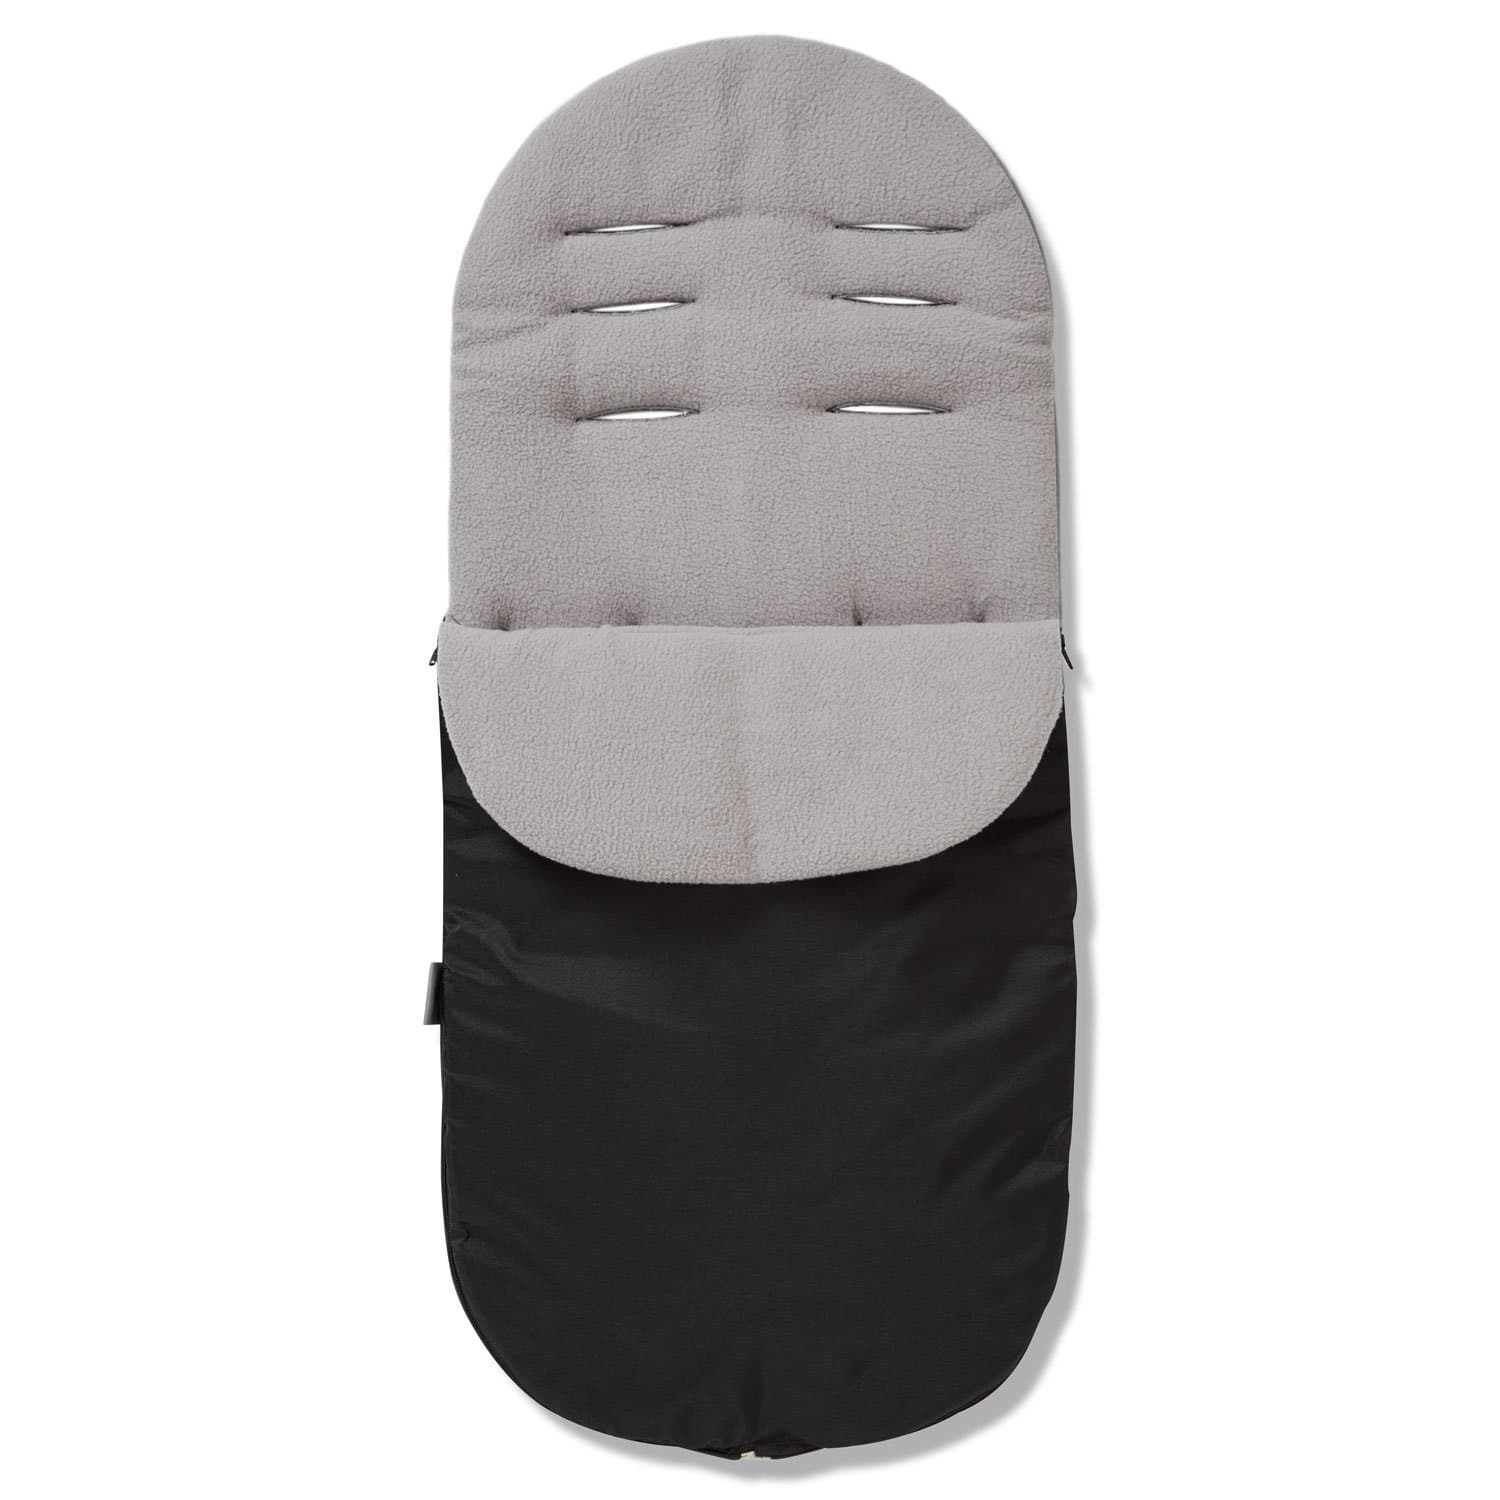 Footmuff / Cosy Toes Compatible with Maxi Cosi - Grey / Fits All Models | For Your Little One